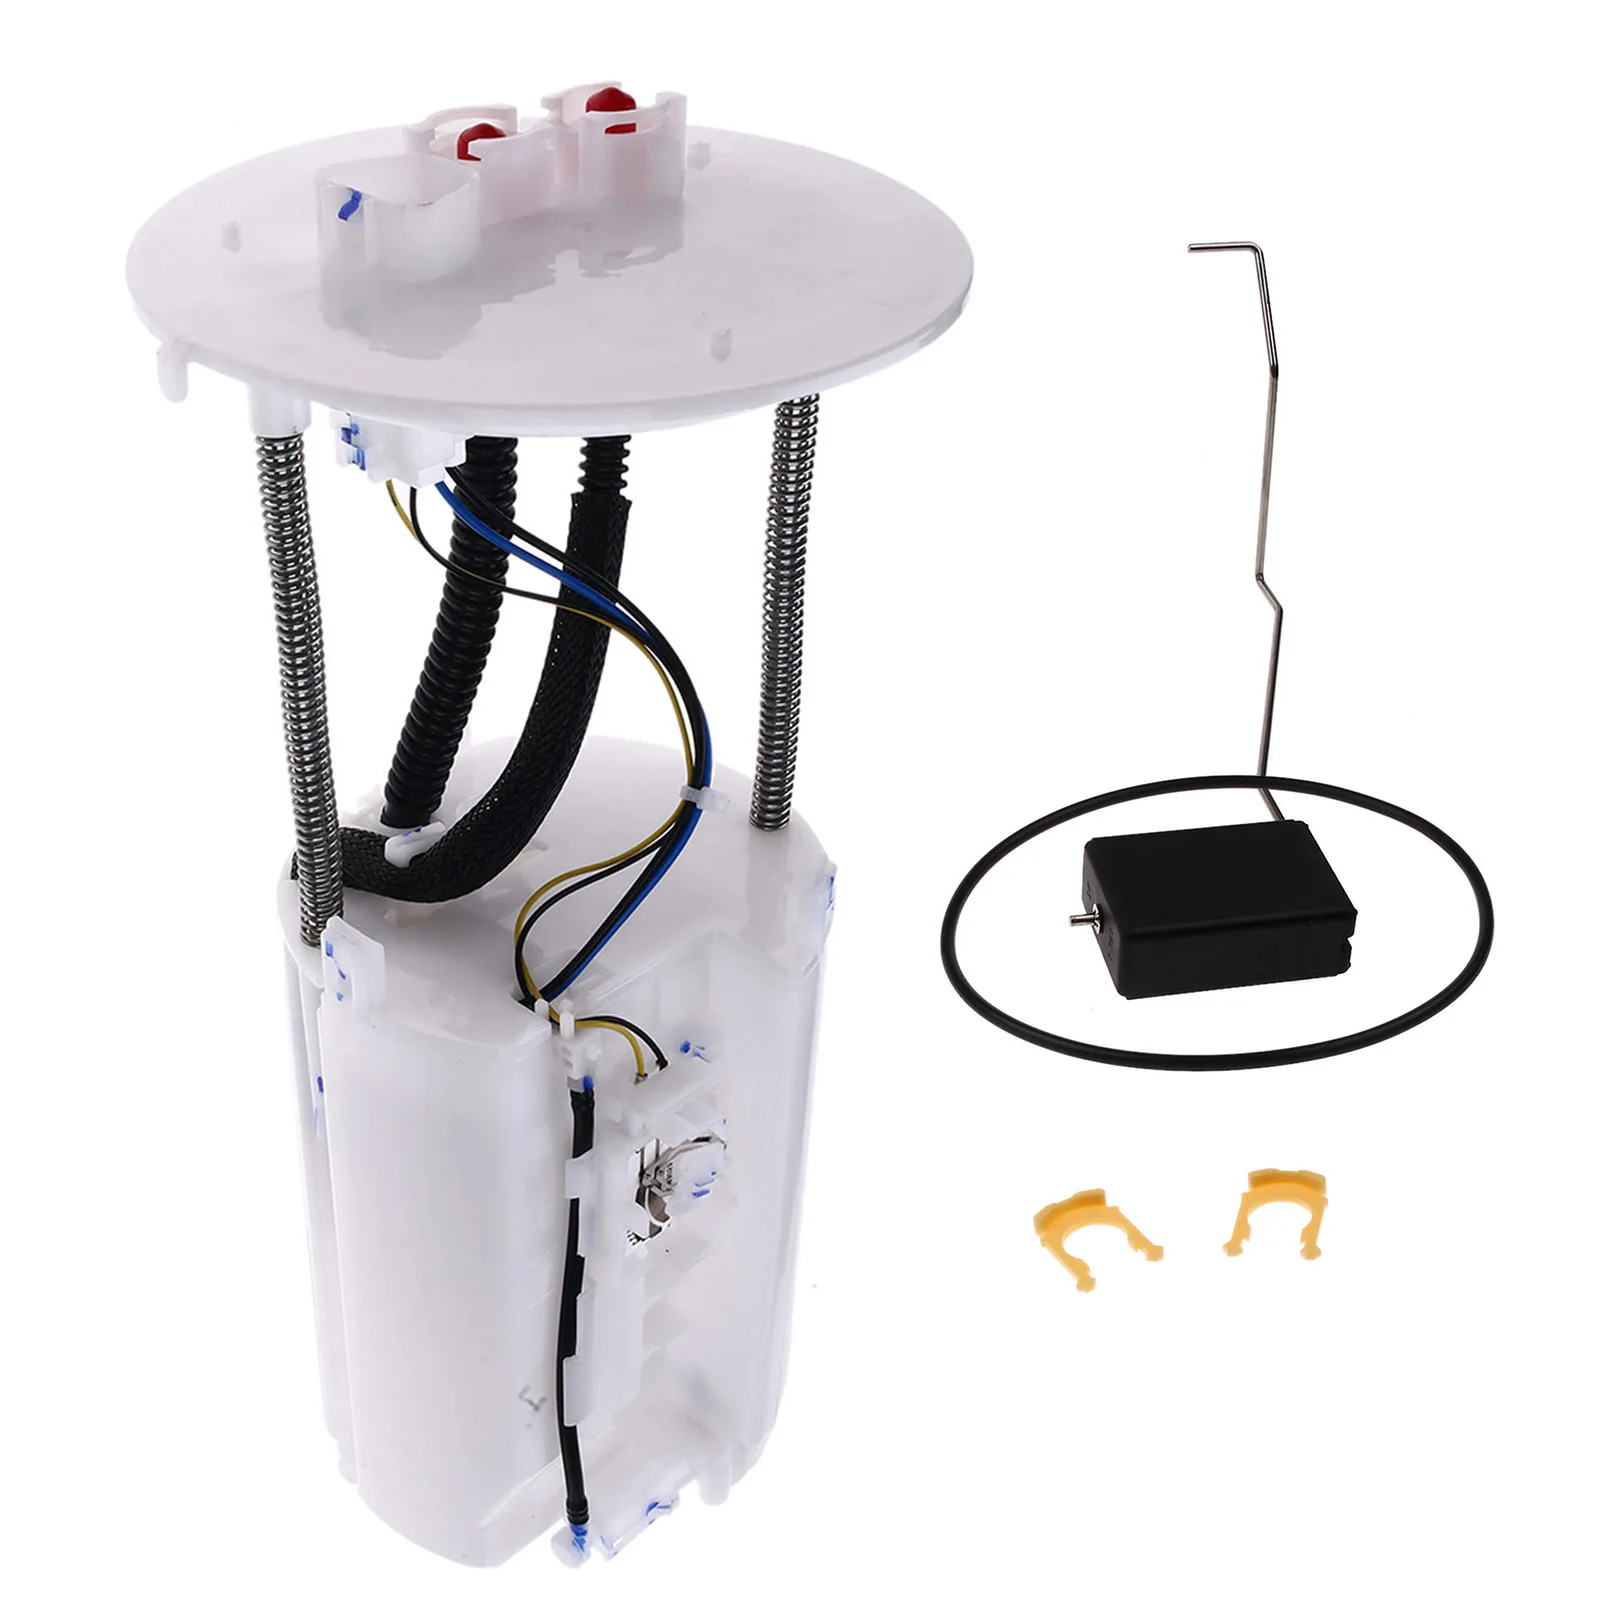 

In-stock CN US CA Fuel Pump Module Assembly for Toyota Tacoma 2005-2015 Petrol 2.7L 4.0L FG0919 7702004061